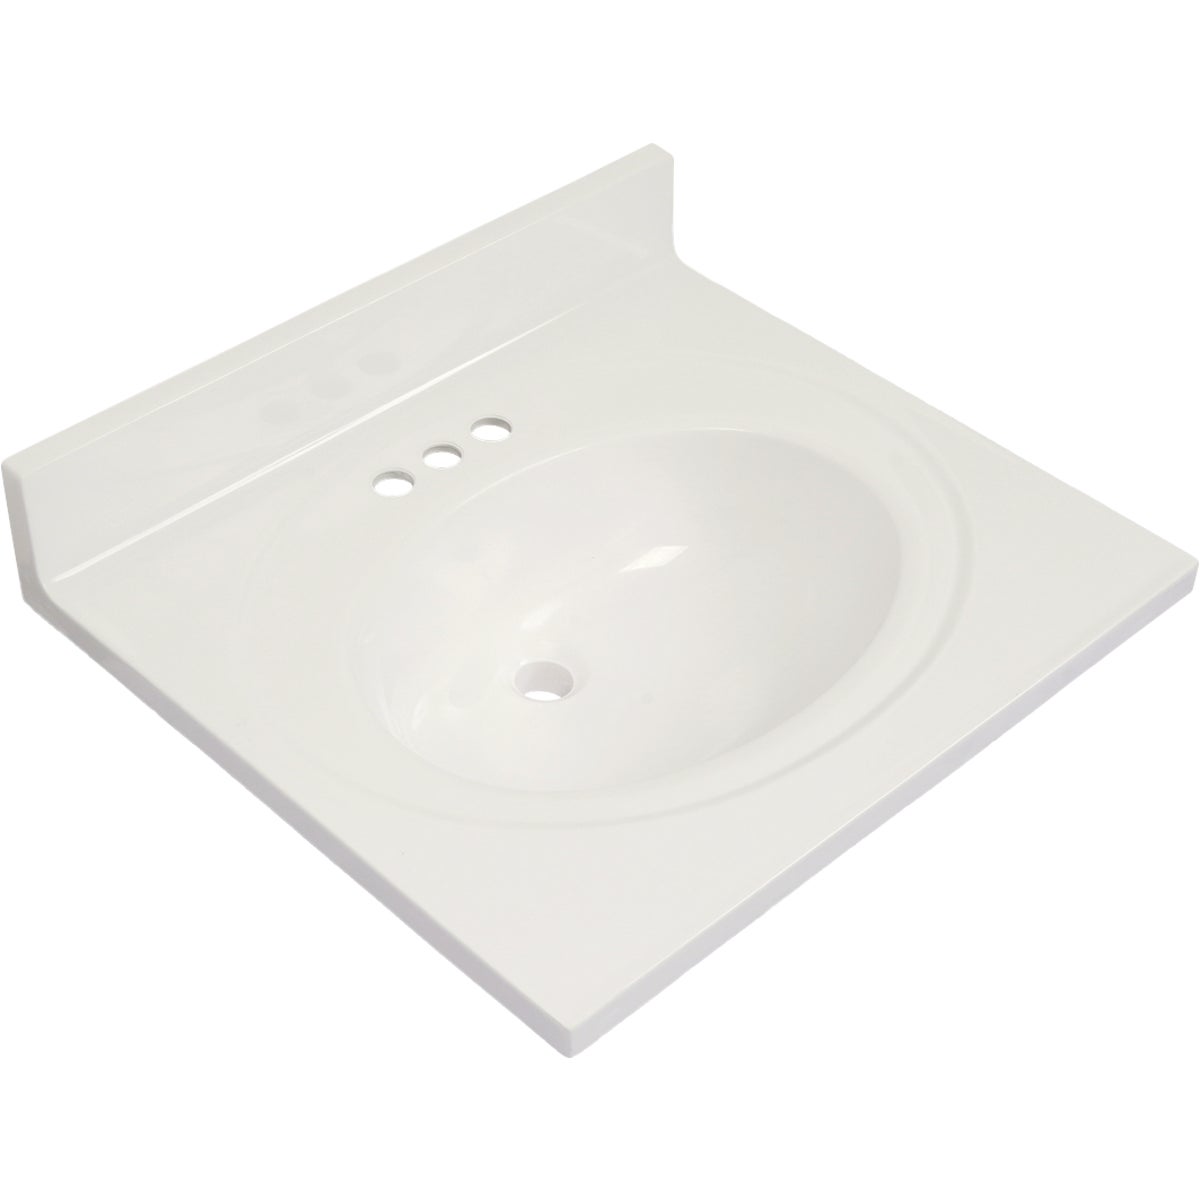 Item 269236, Vanity top with cultured marble, integral non-recessed oval sink, pre-